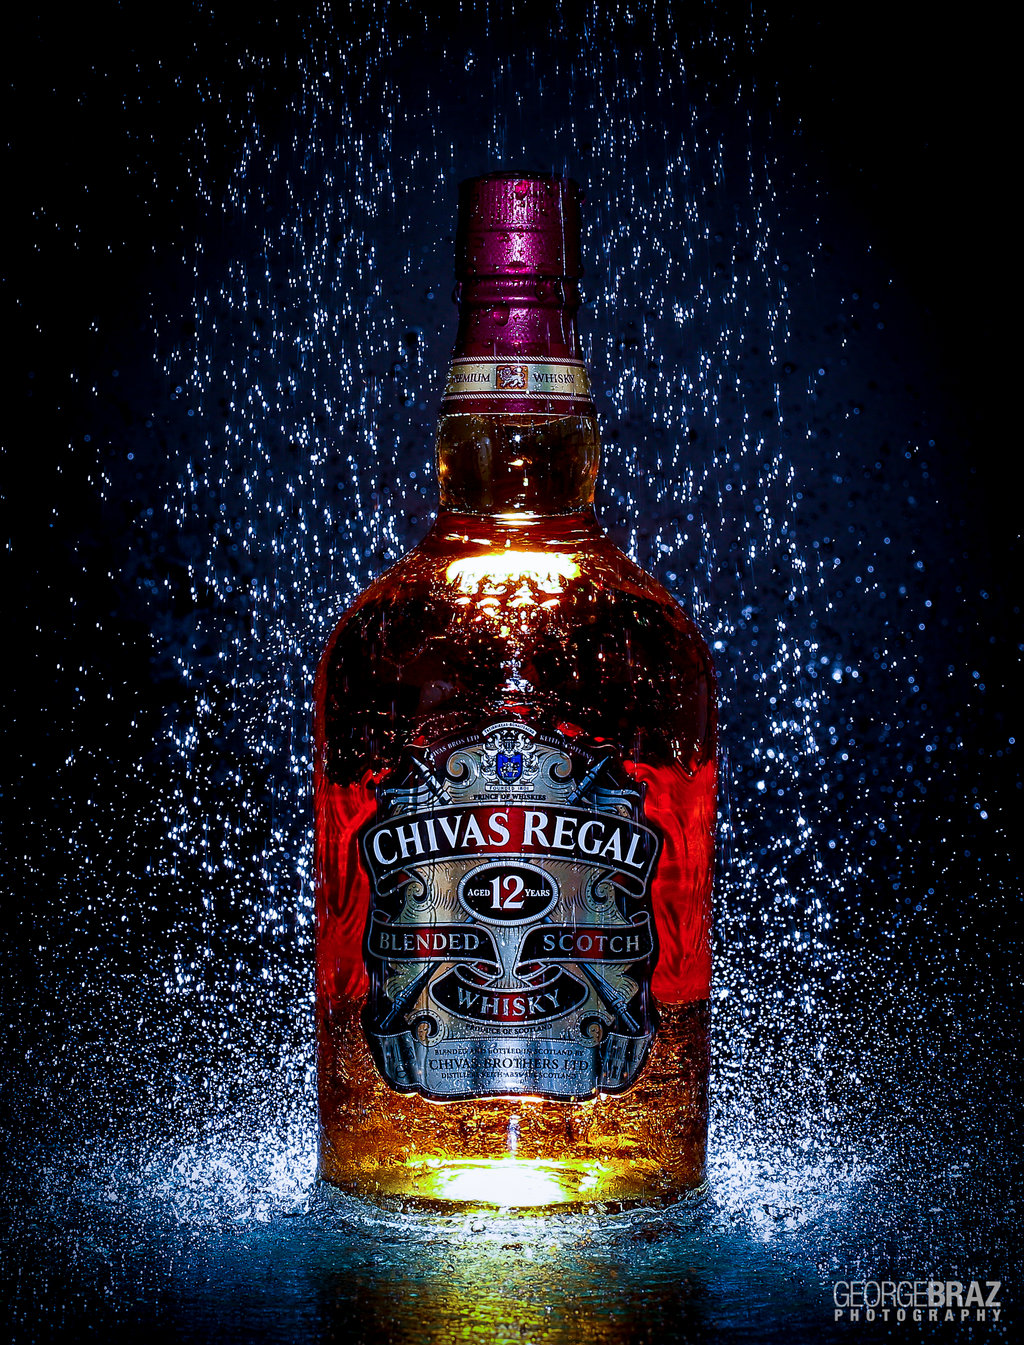 HD Wallpaper Chivas Regal Whisky Android Best Food